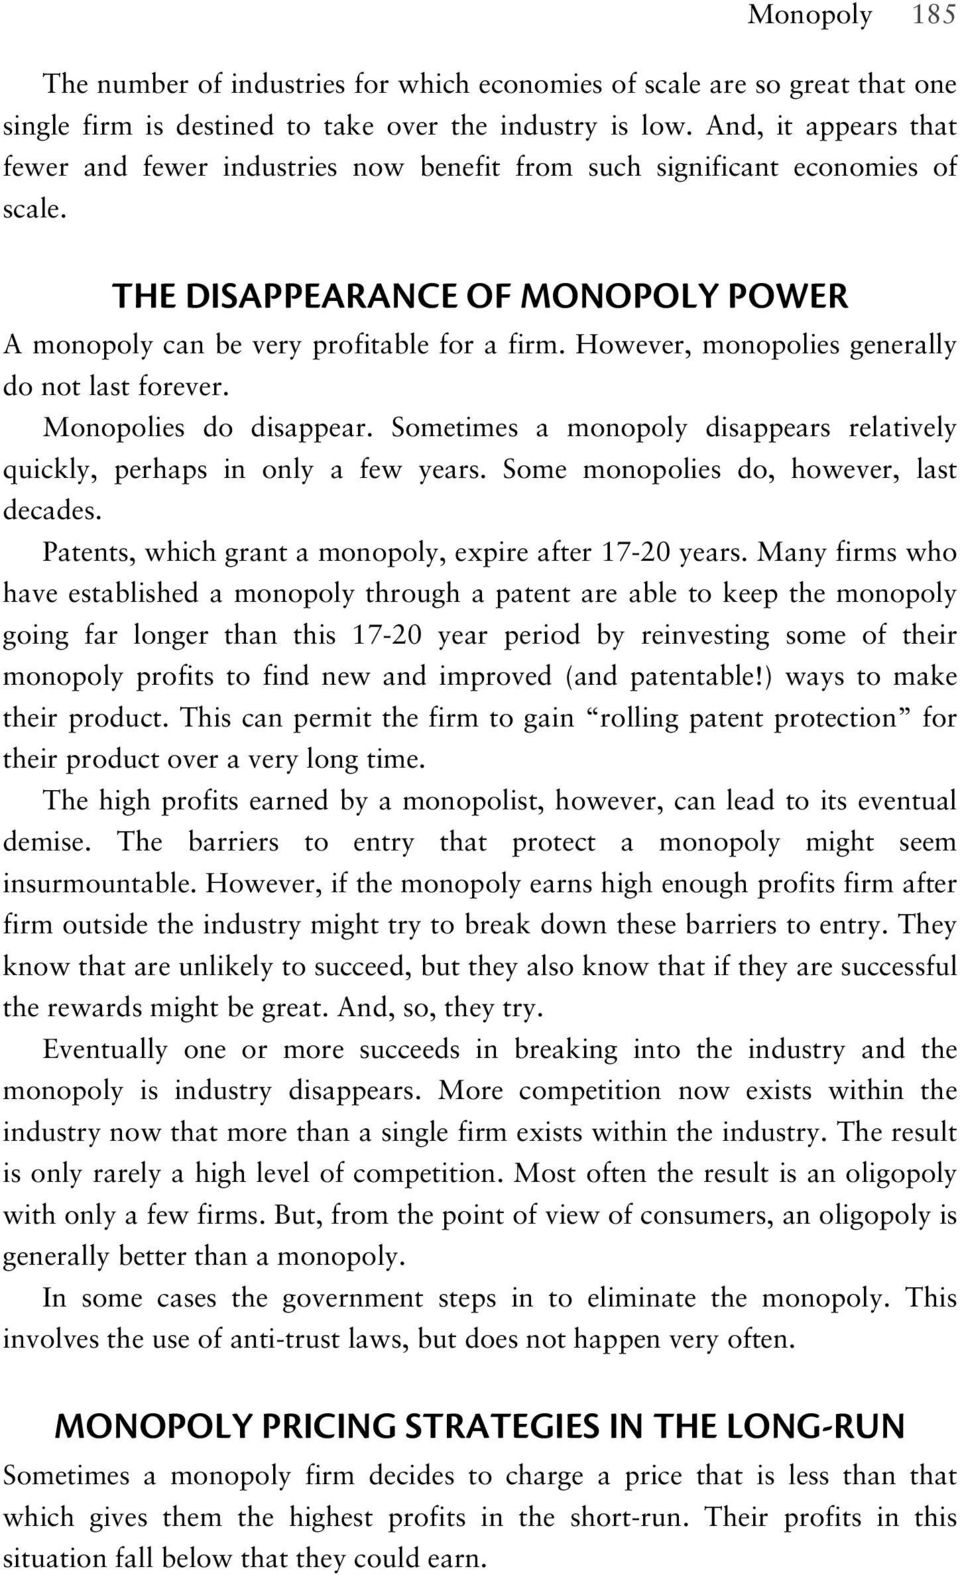 However, monopolies generally do not last forever. Monopolies do disappear. Sometimes a monopoly disappears relatively quickly, perhaps in only a few years. Some monopolies do, however, last decades.